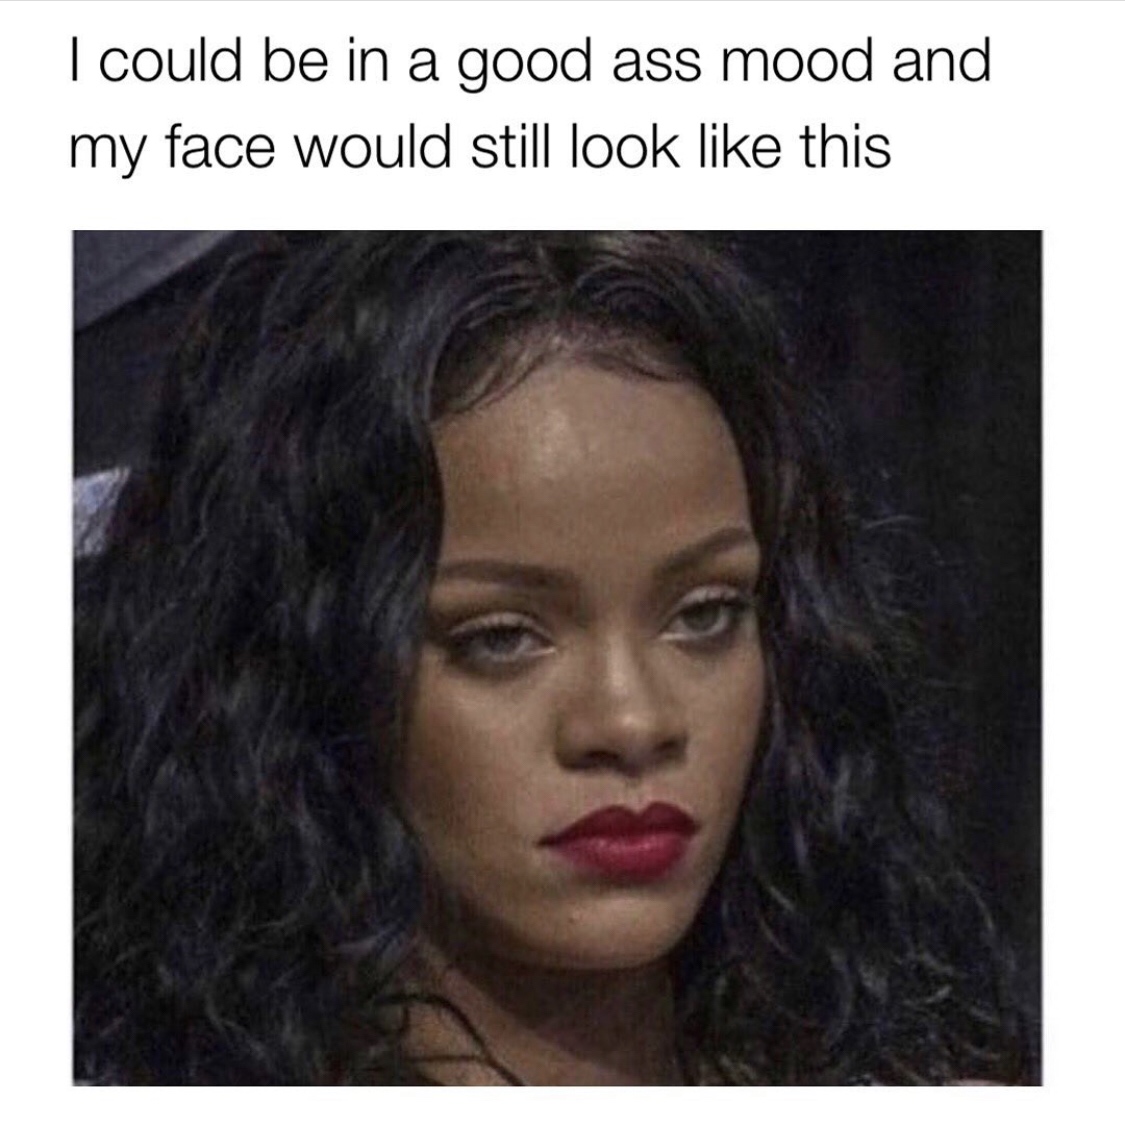 mood face quotes - I could be in a good ass mood and my face would still look this